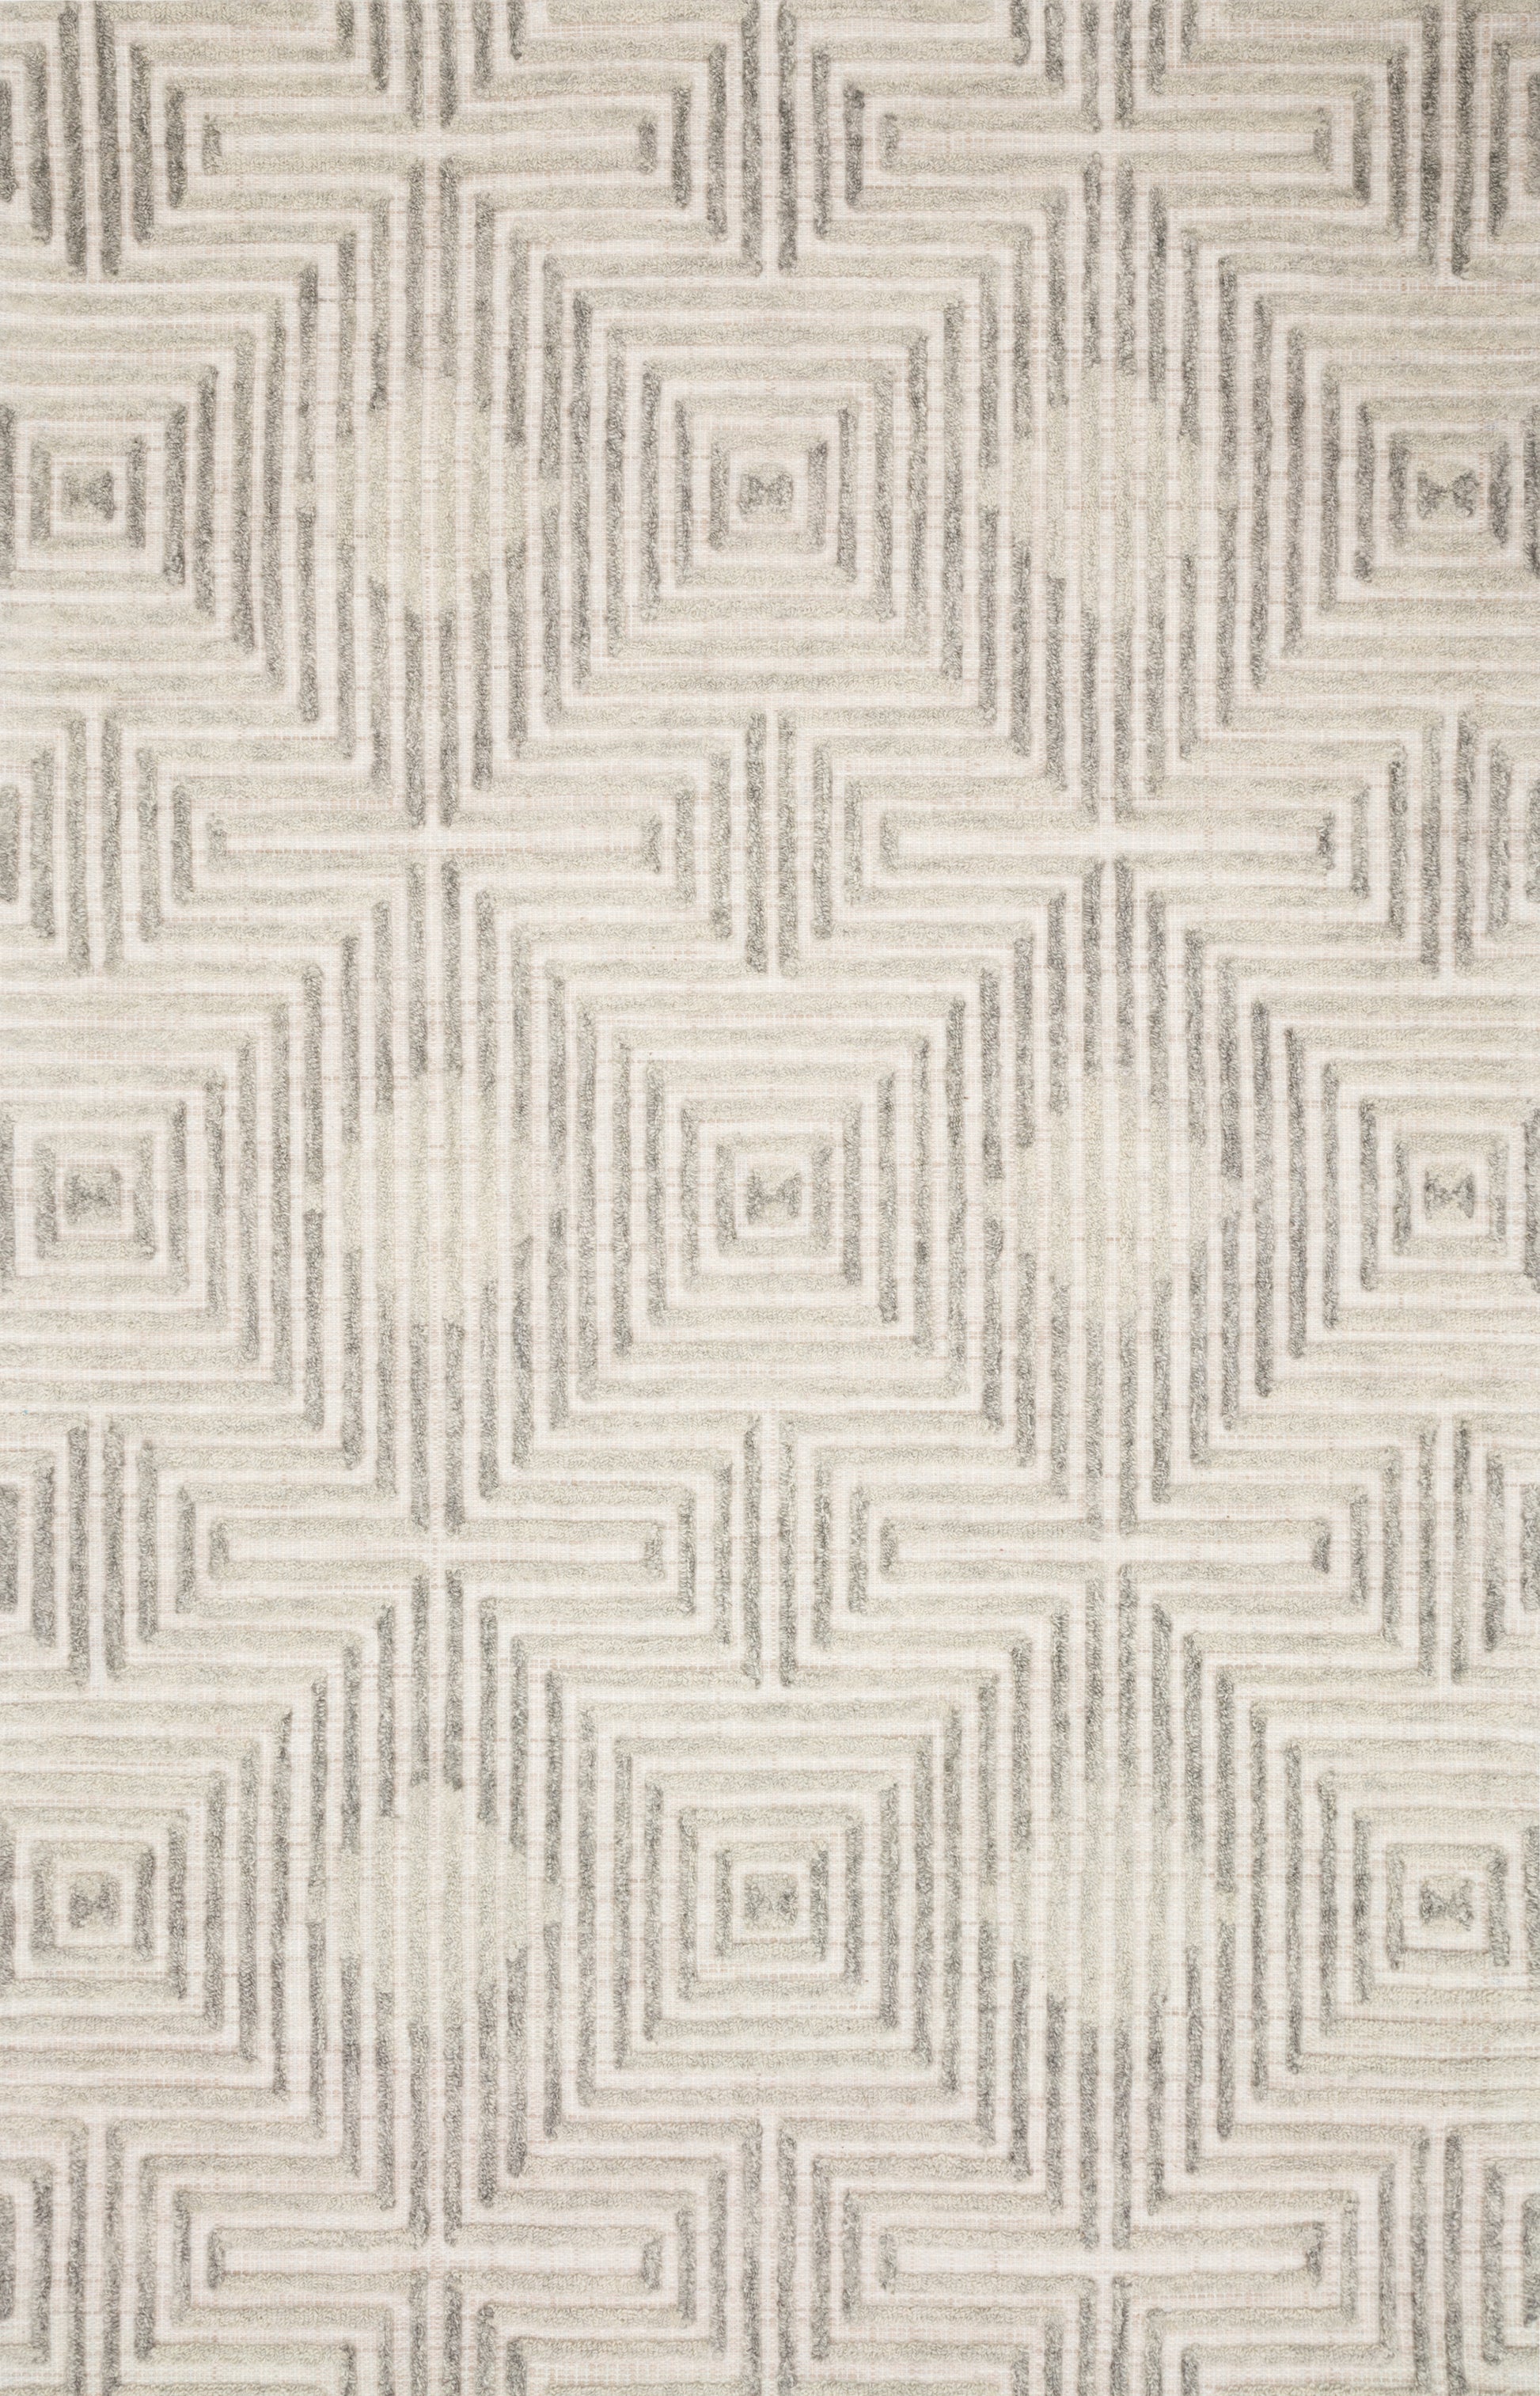 A picture of Loloi's Ehren rug, in style EHR-02, color Grey / Silver